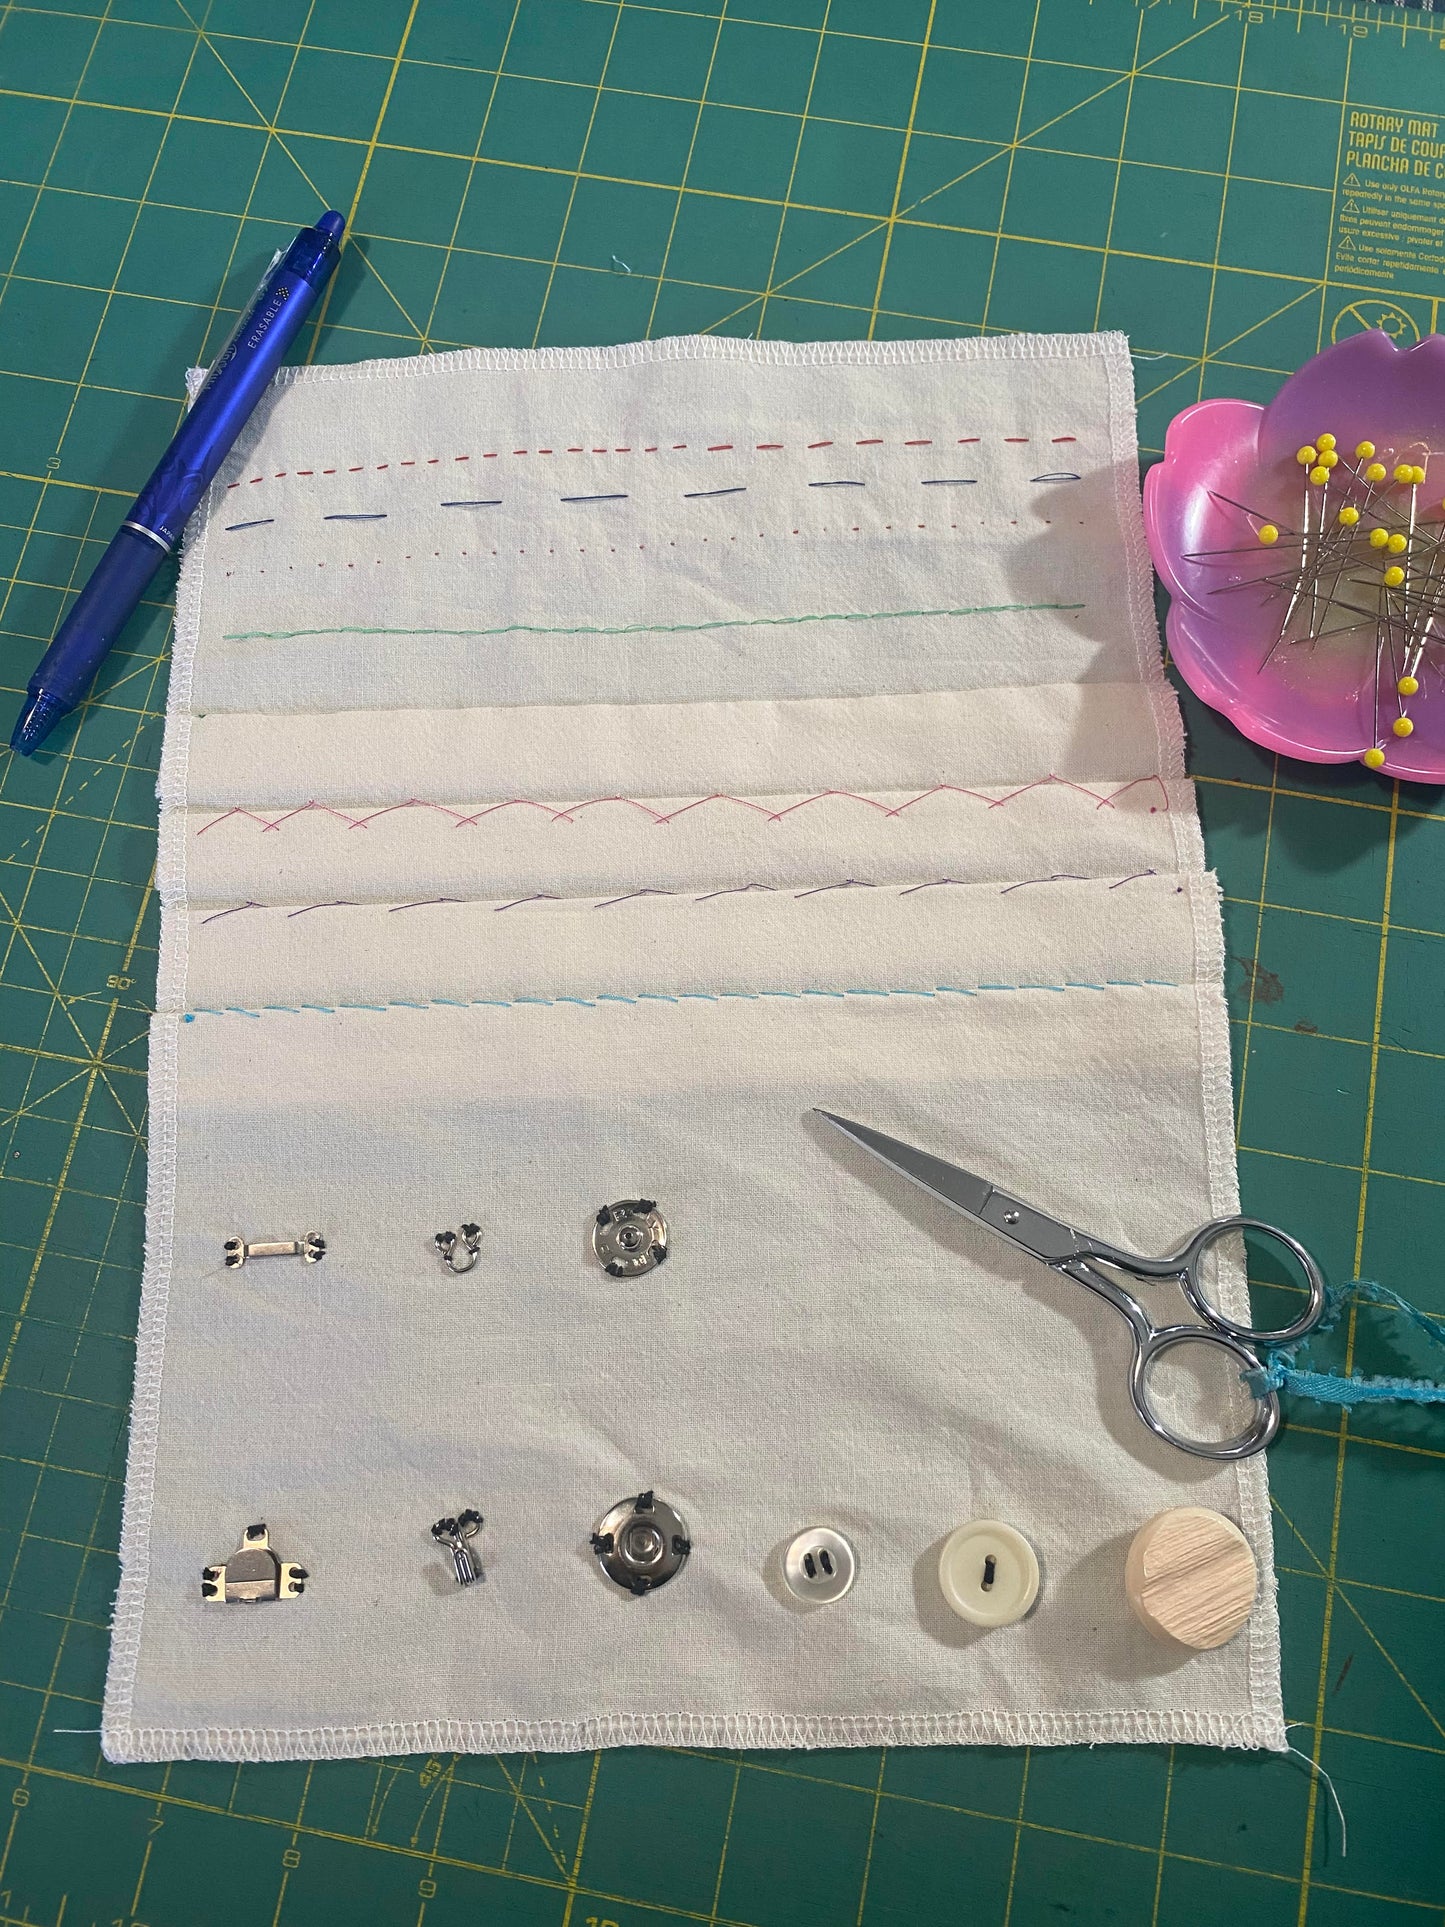 Displayed on a cutting mat is a sampler of hand stitching with scissors, pins and a marking pen.